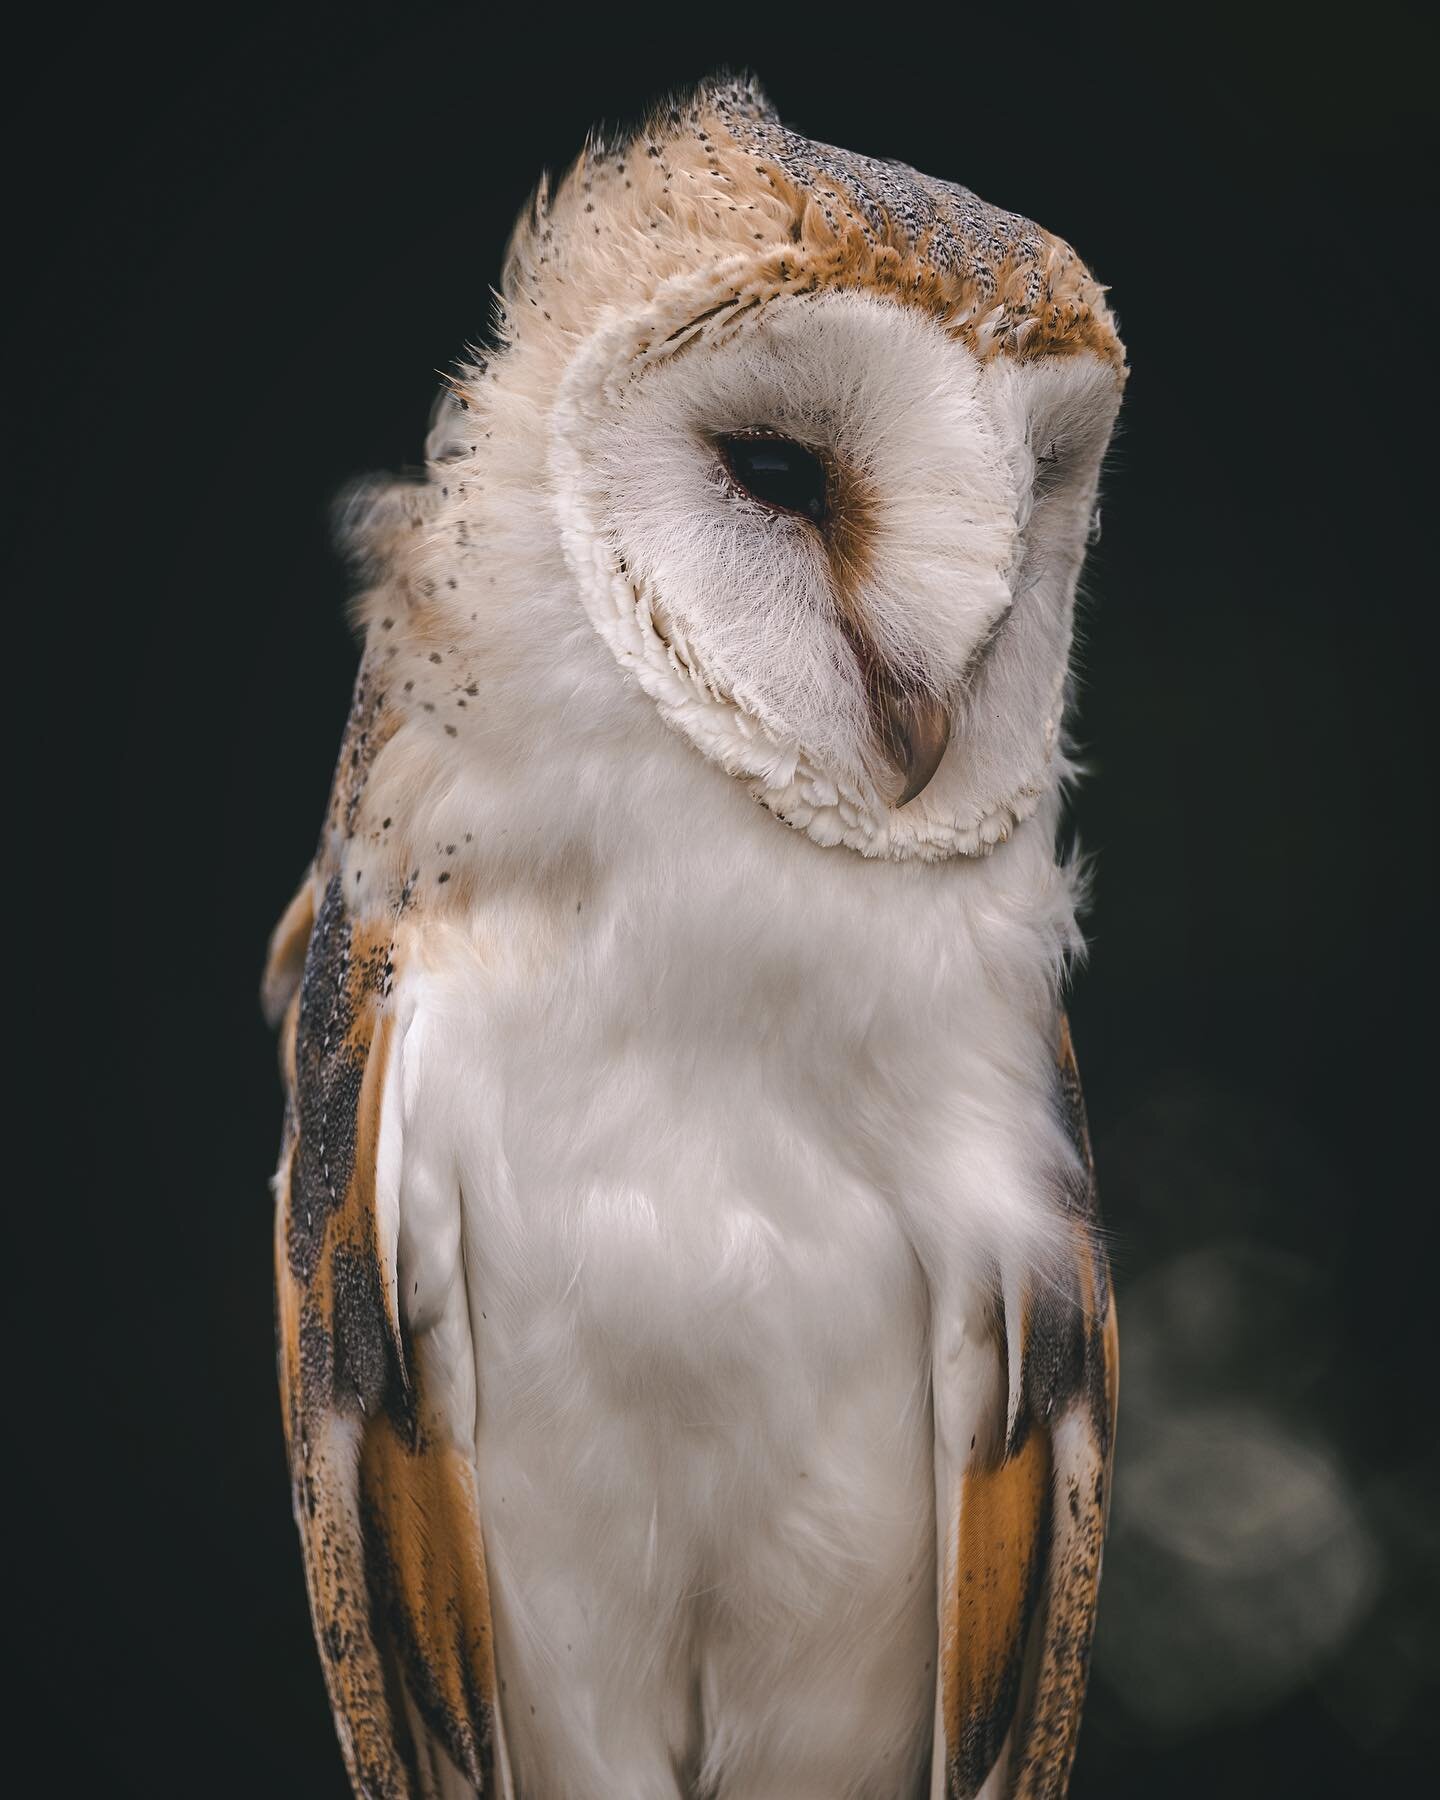 Barn owls have got to be one of the most beautiful animals on this planet haven&rsquo;t they? 

Not a wild bird unfortunately, but great opportunity to get close and photograph the details of this beauty!

@nikoneurope Z9 &amp; 100-400 4.5-5.6 S

#bb